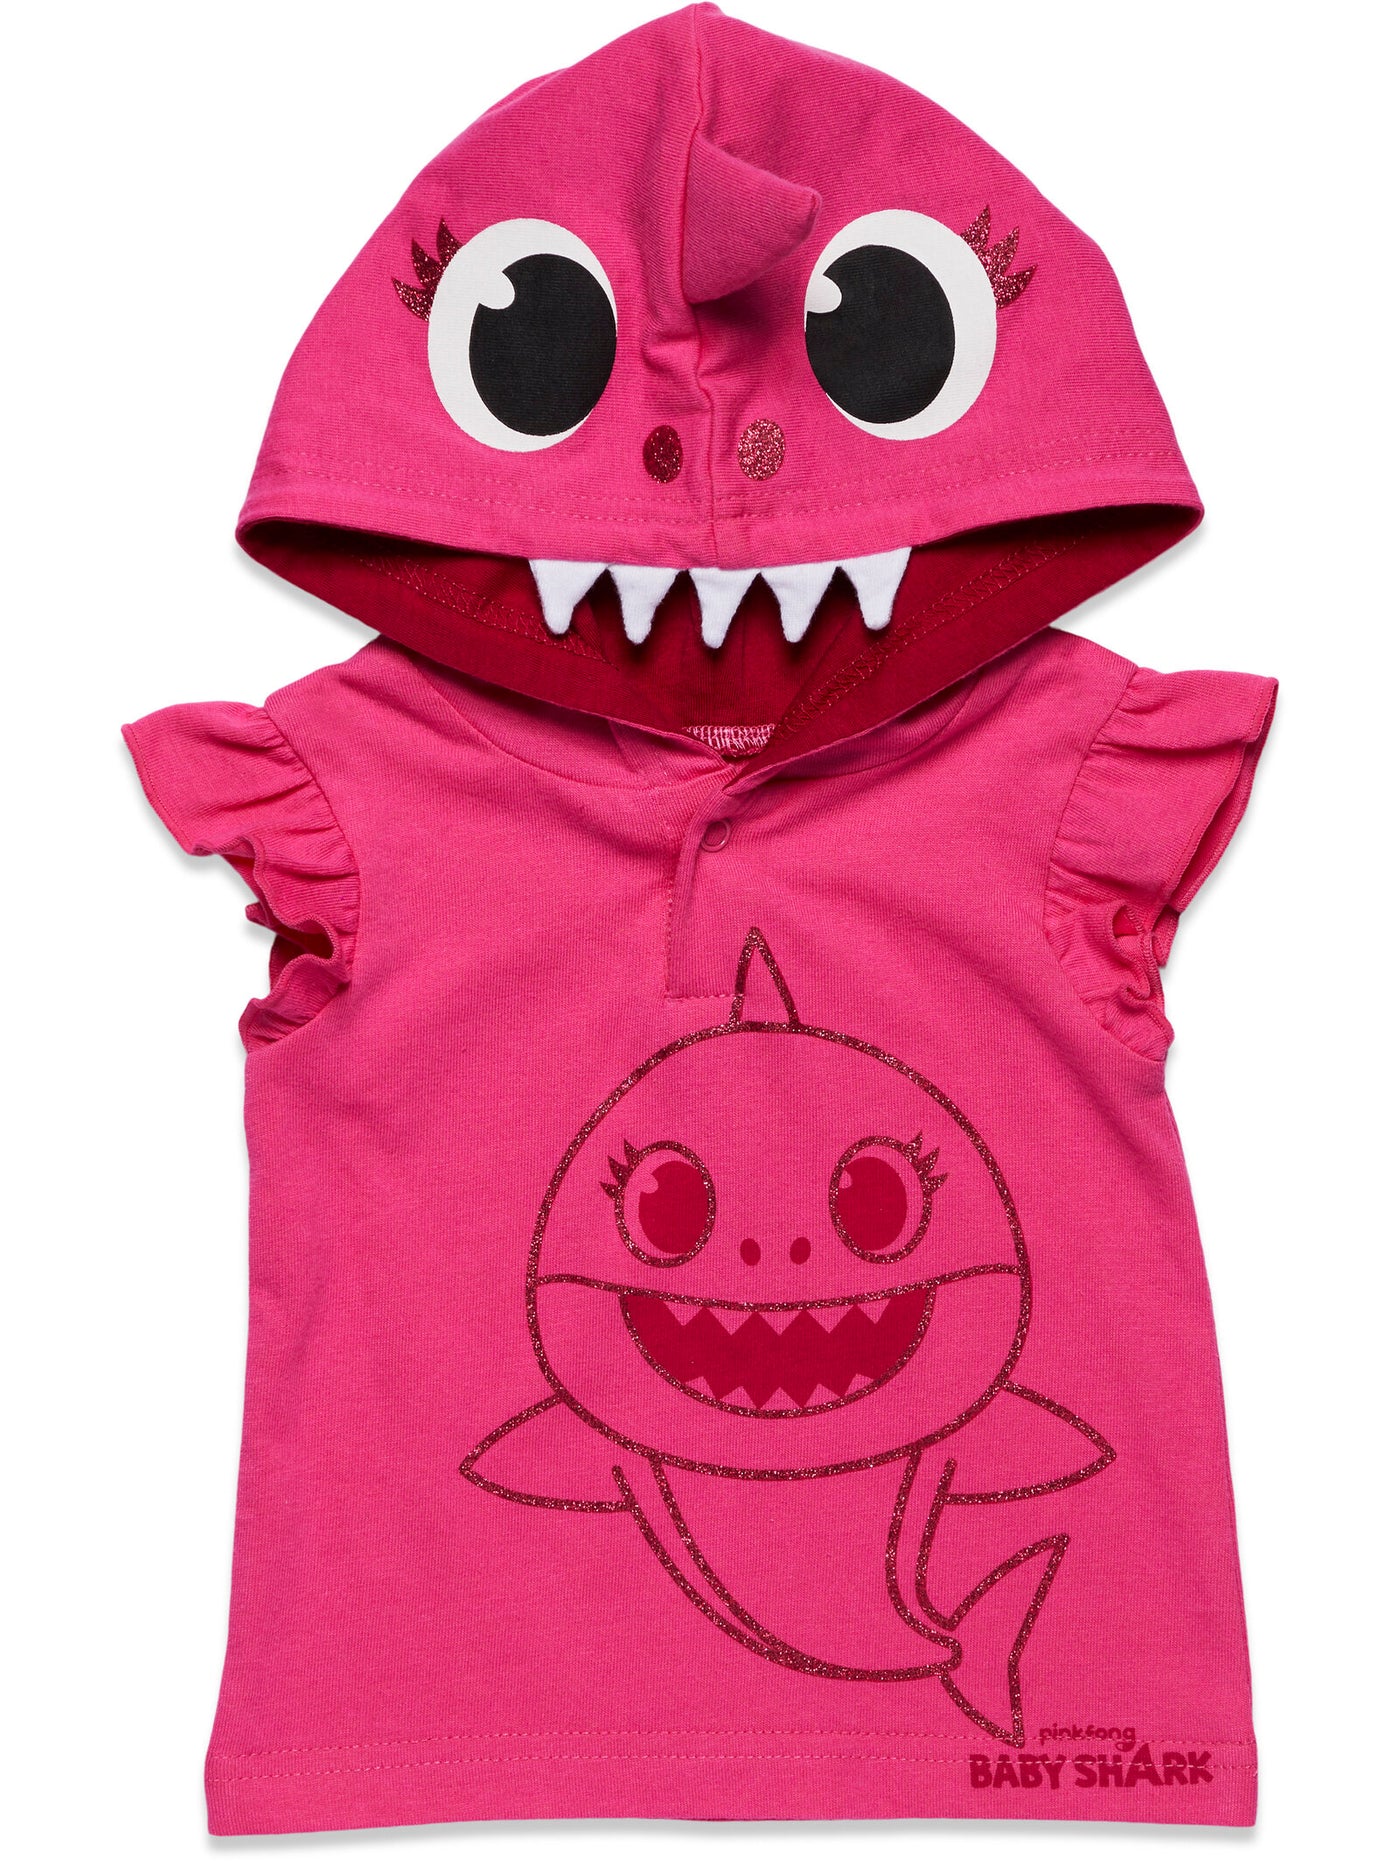 Pinkfong Baby Shark French Terry camiseta gráfica sin mangas y pantalones cortos de French Terry